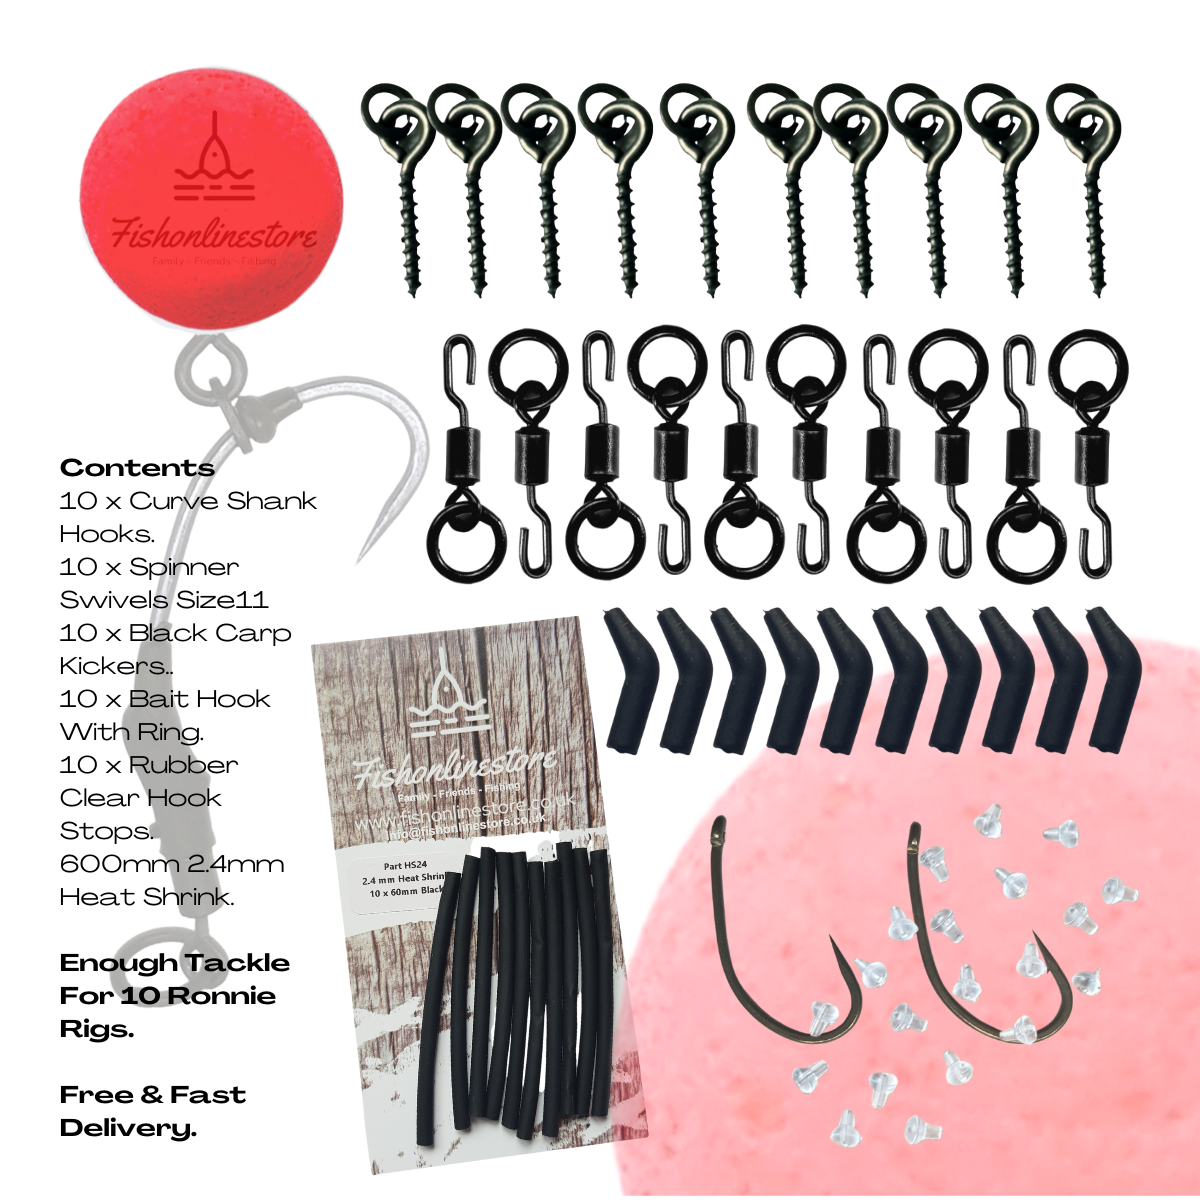 Create A Ronnie Rig -  New 60 Piece Carp Fishing Spinner Rig Component Set Bundle From the Fishonlinestore.